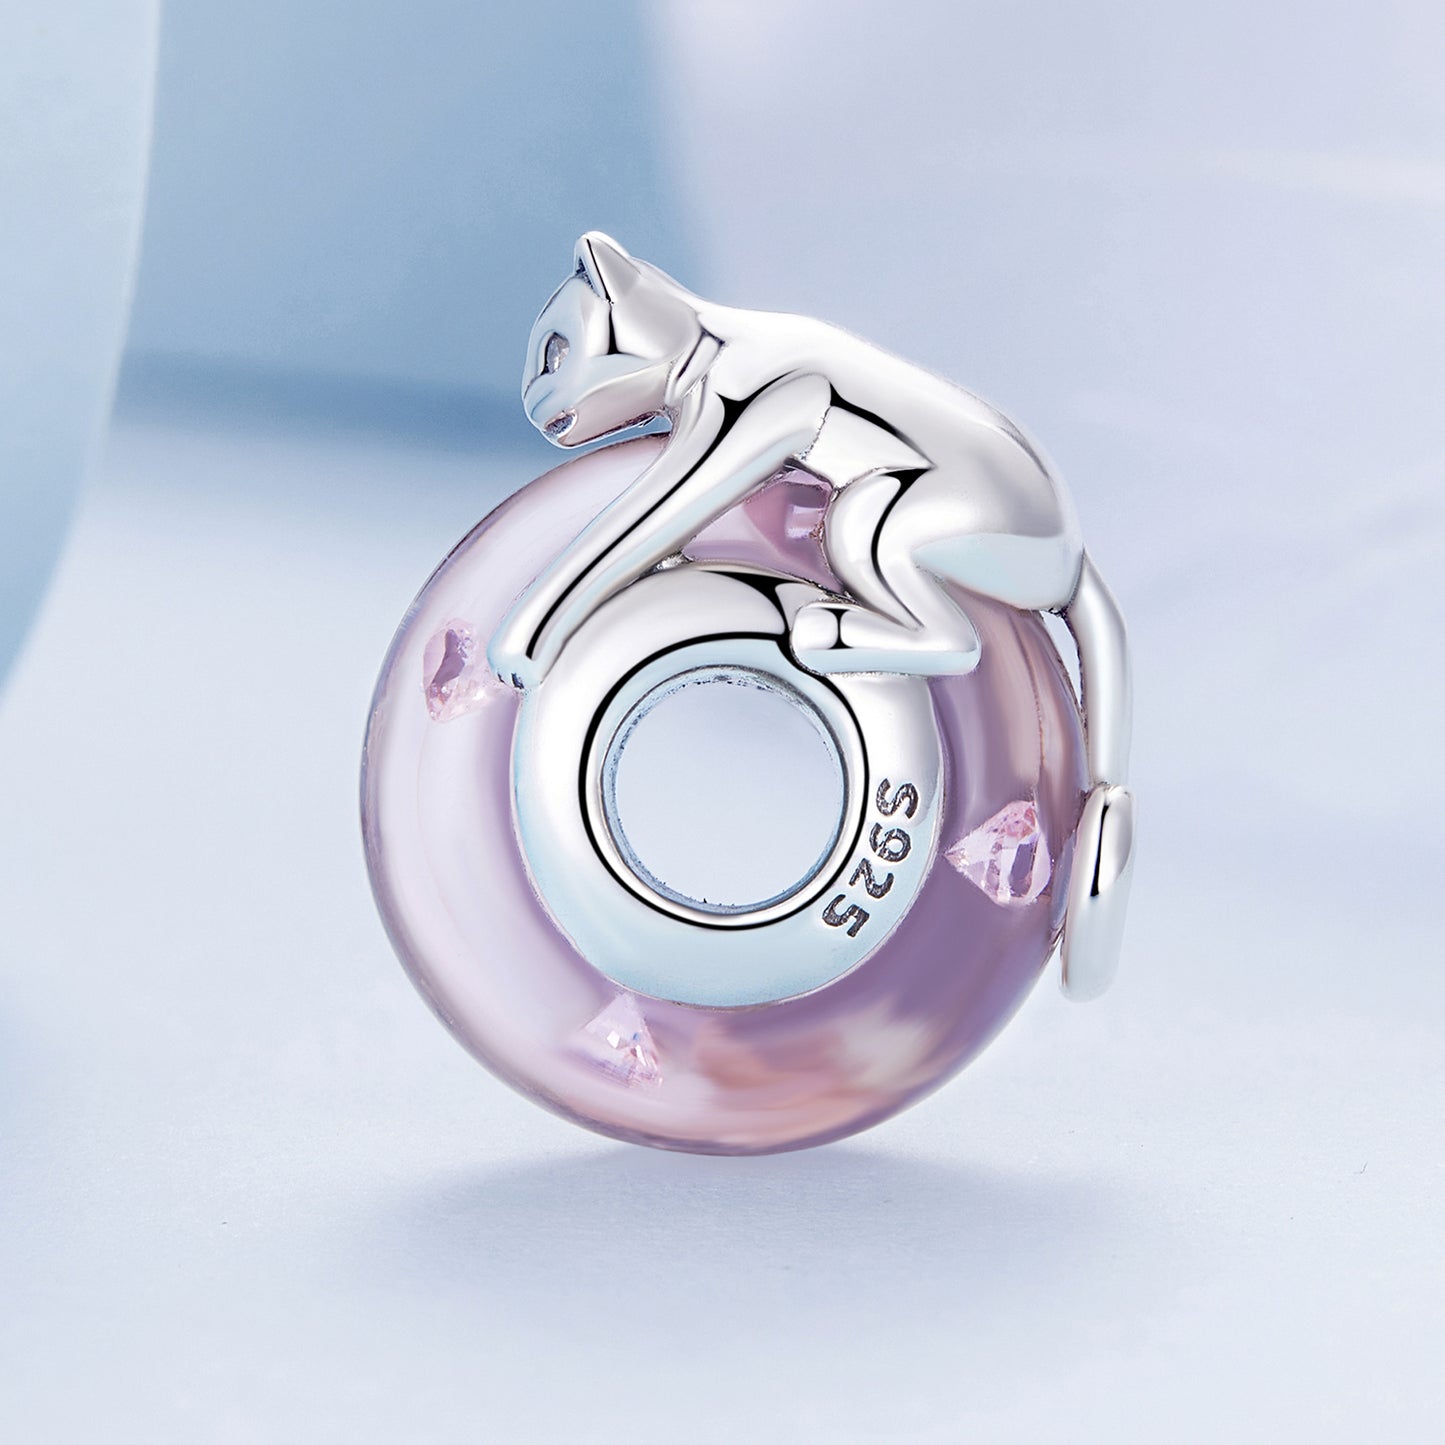 Charm Verre Animaux Rose Chat Méchant